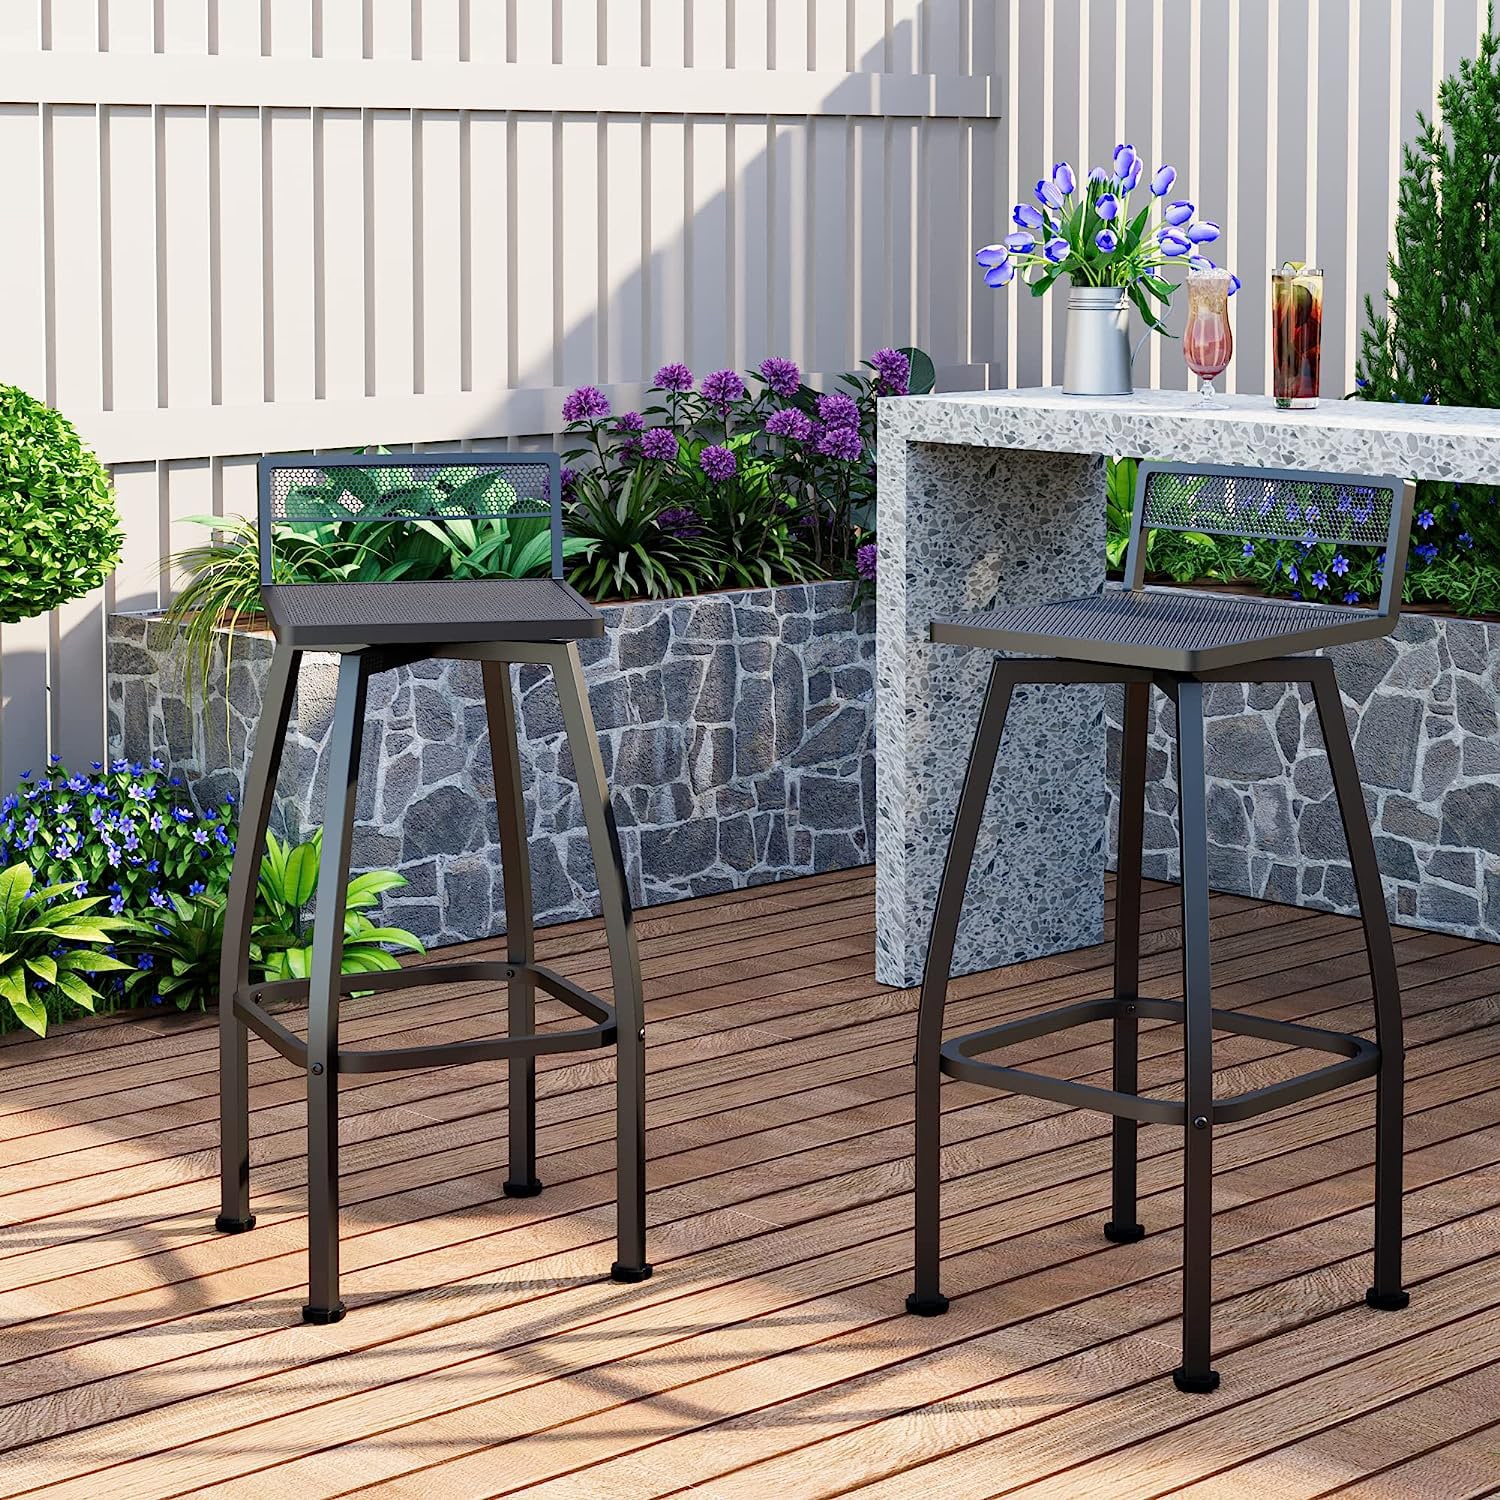 Cantilevered Work Bench Stools